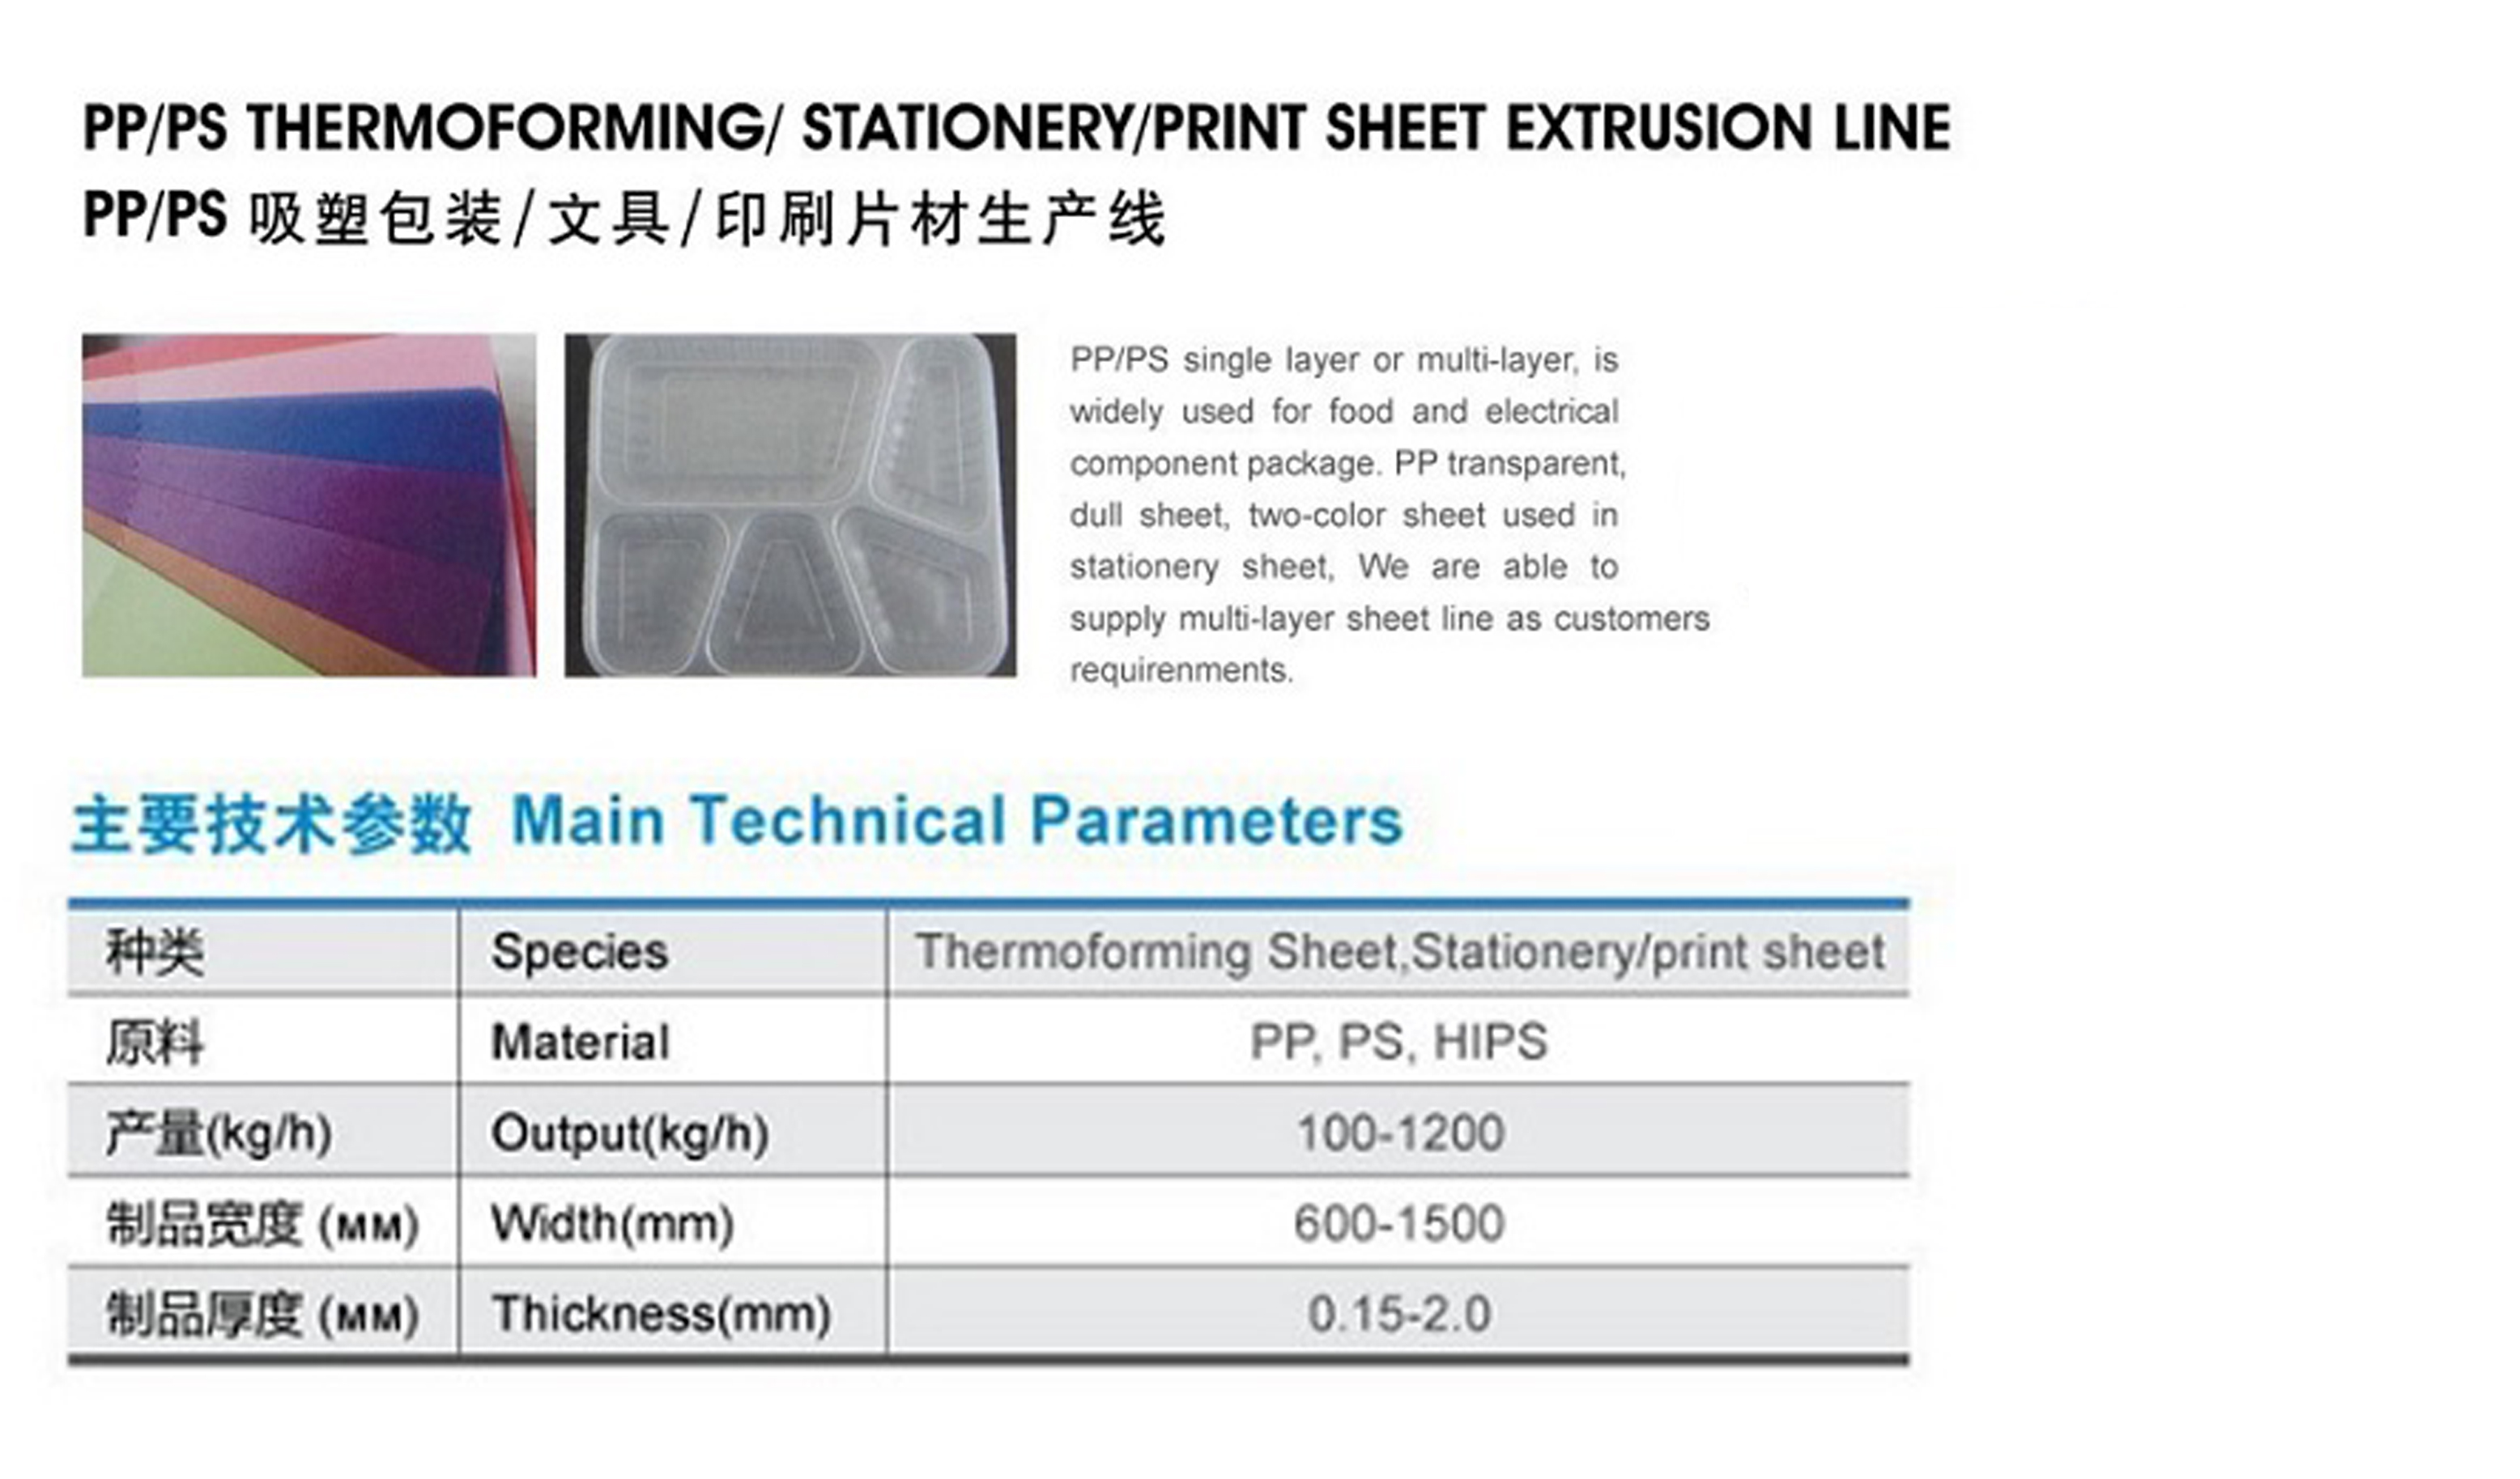 PP PS THERMOFORMING STATIONERY PRINT SHEET EXTRUSION LINE-2.jpg